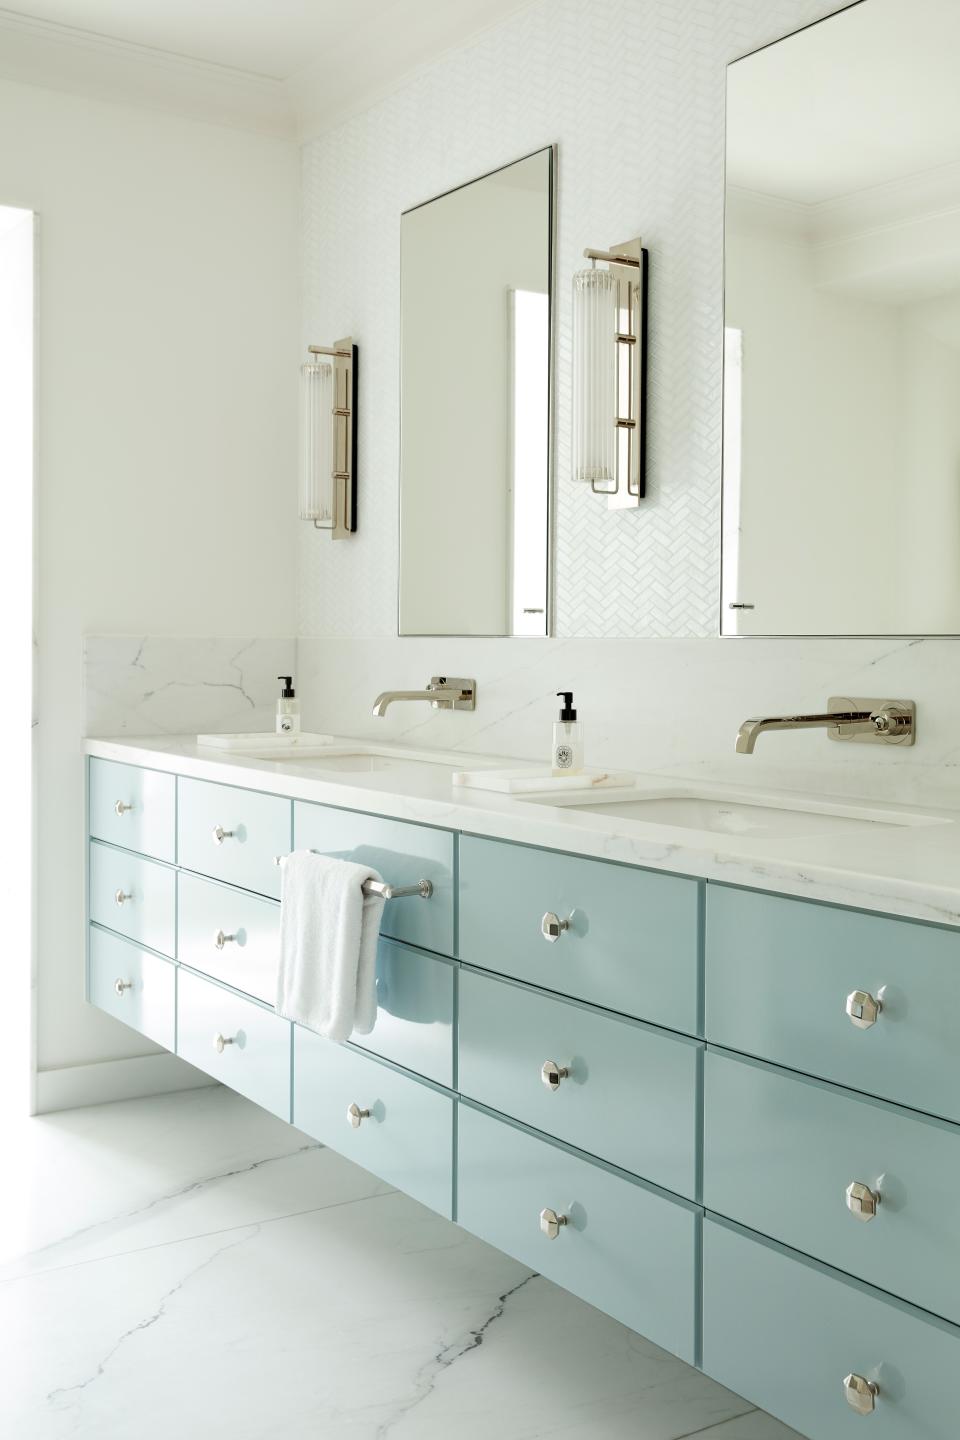 The high-gloss bathroom was designed by LyonsKelly with cabinetwork from Abington Design House. The lights are from Jonathan Coles while the quartzite marble was sourced from Miller Brothers.